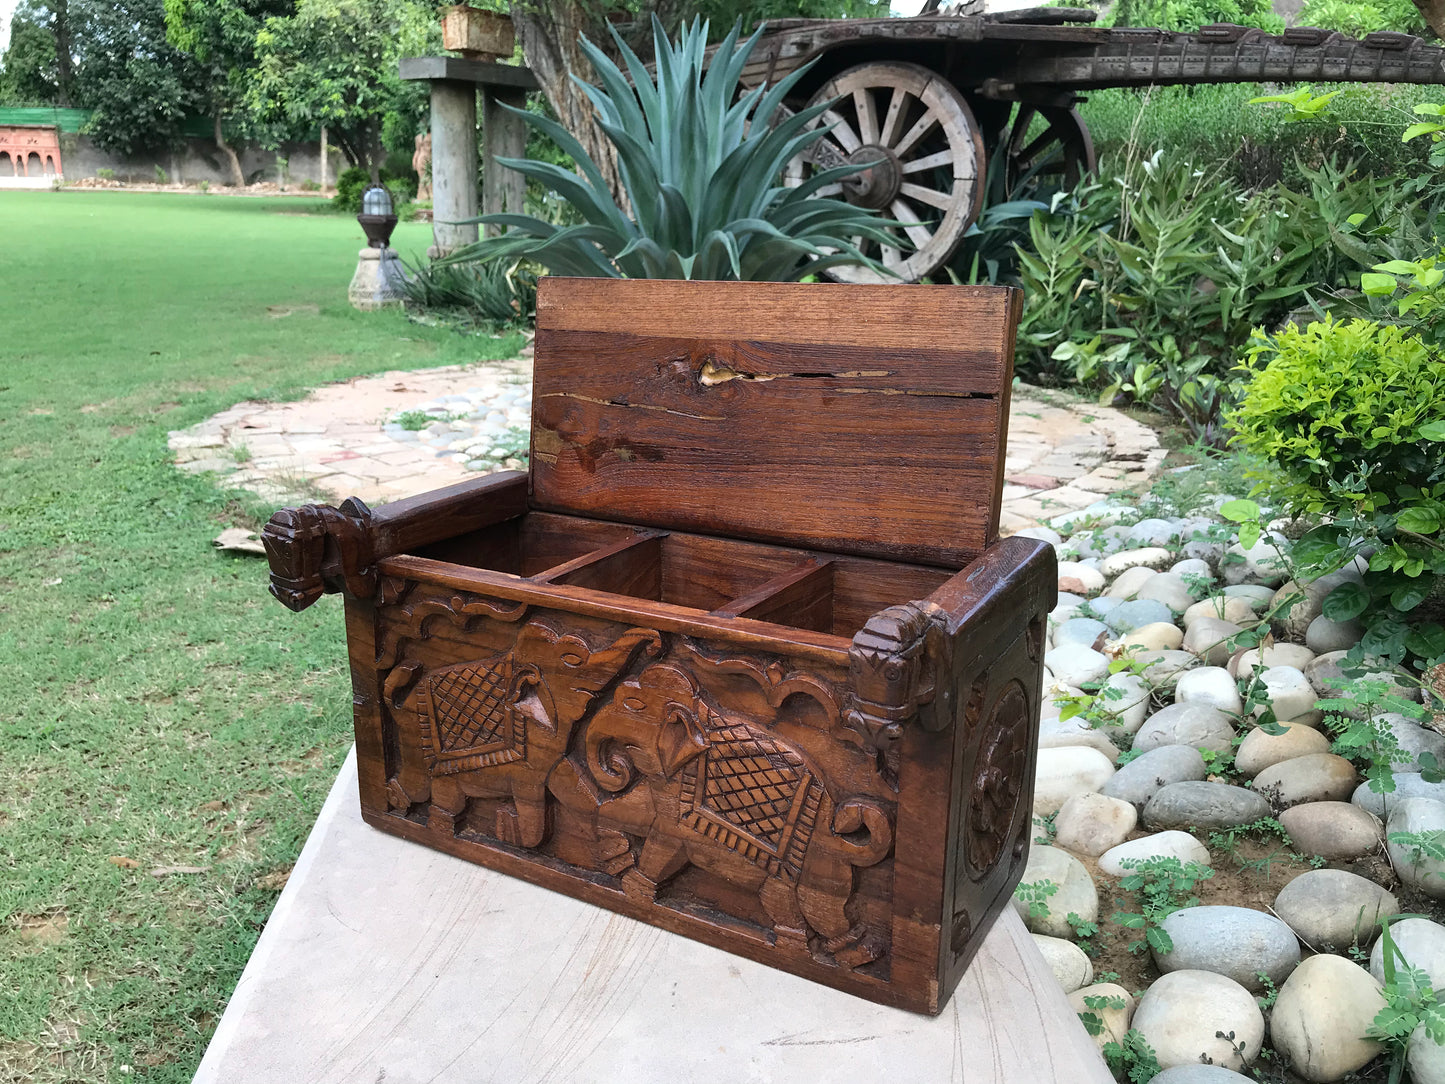 Image of Elegant and Traditional Wooden Horse Head with Elephants Box.  The Source India is an Indian Handicraft, Home Decor, Furnishing and Textiles Store. Based out of Hauz Khas Village New Delhi, each piece is carefully procured to allow the enhancement of India's Culture.